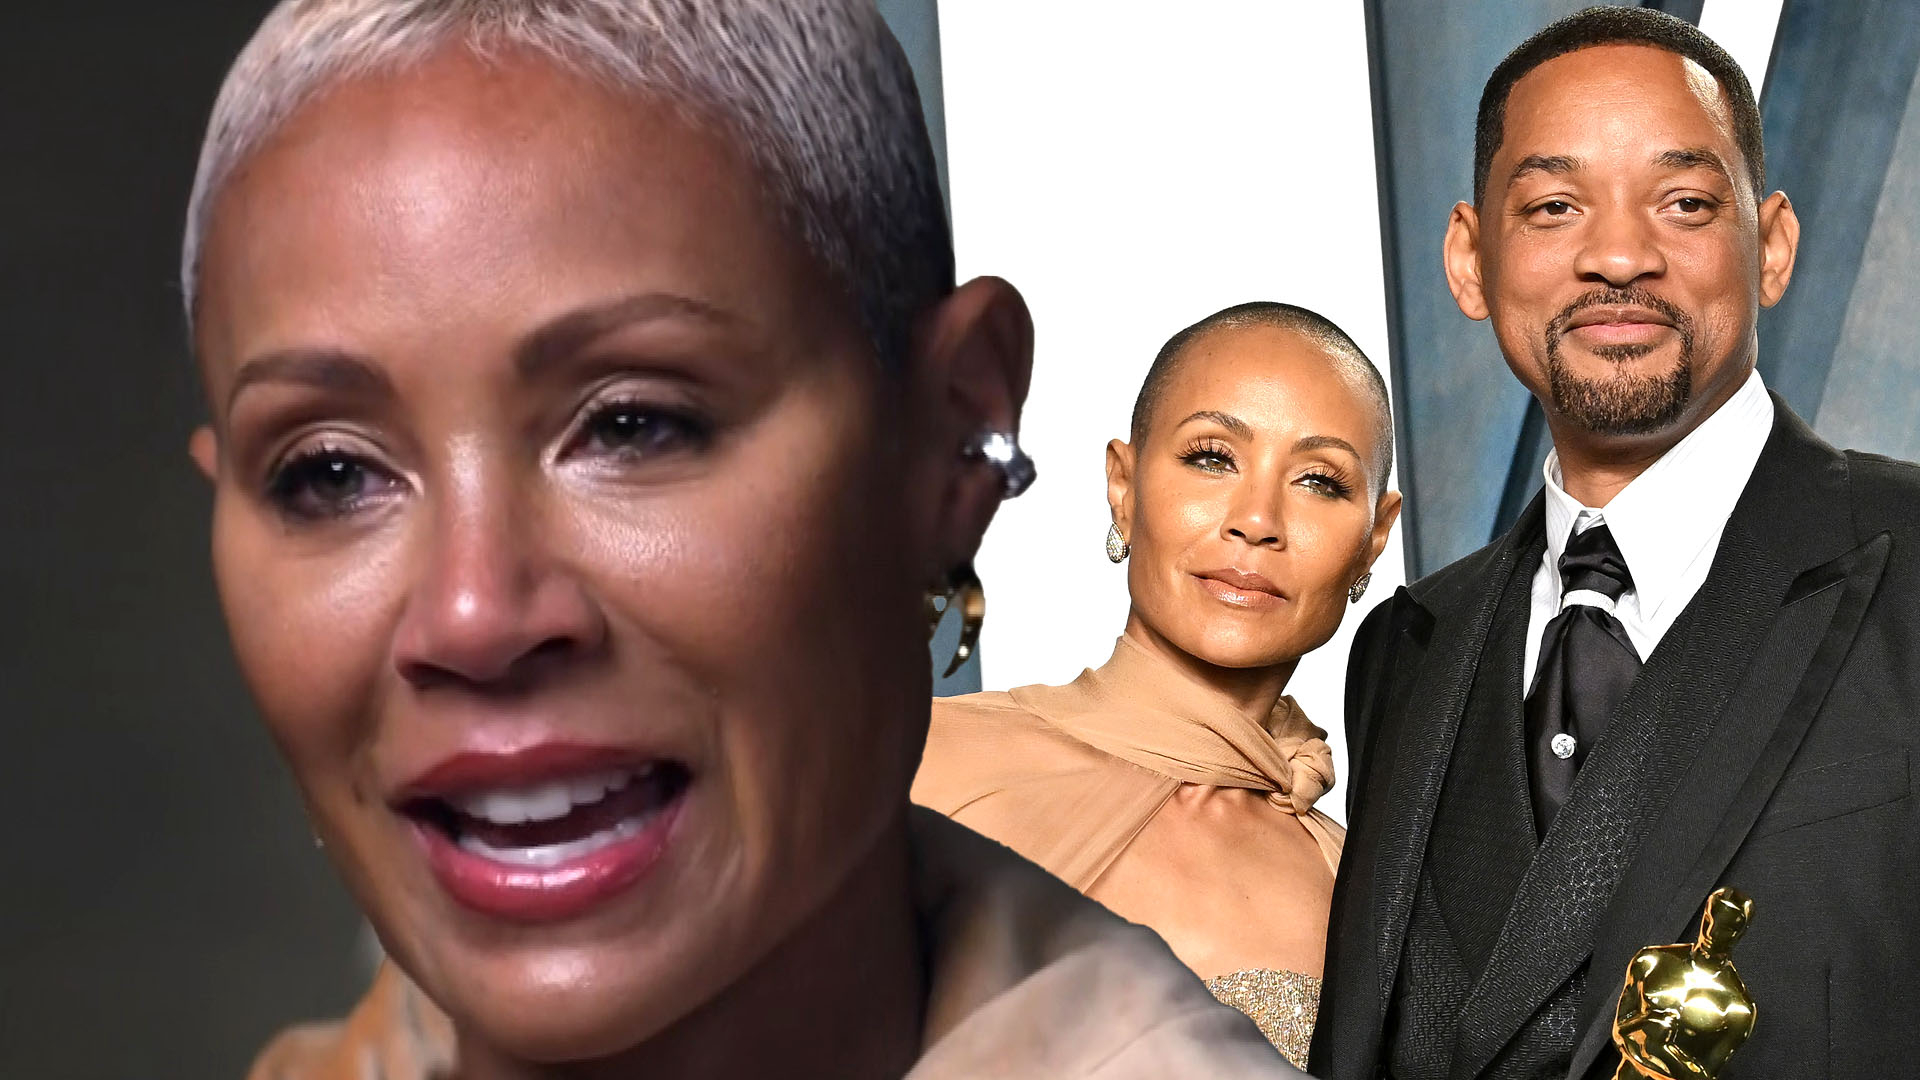 Jada Pinkett Smith Reveals She Moved Out of Home She Shared With Will Smith